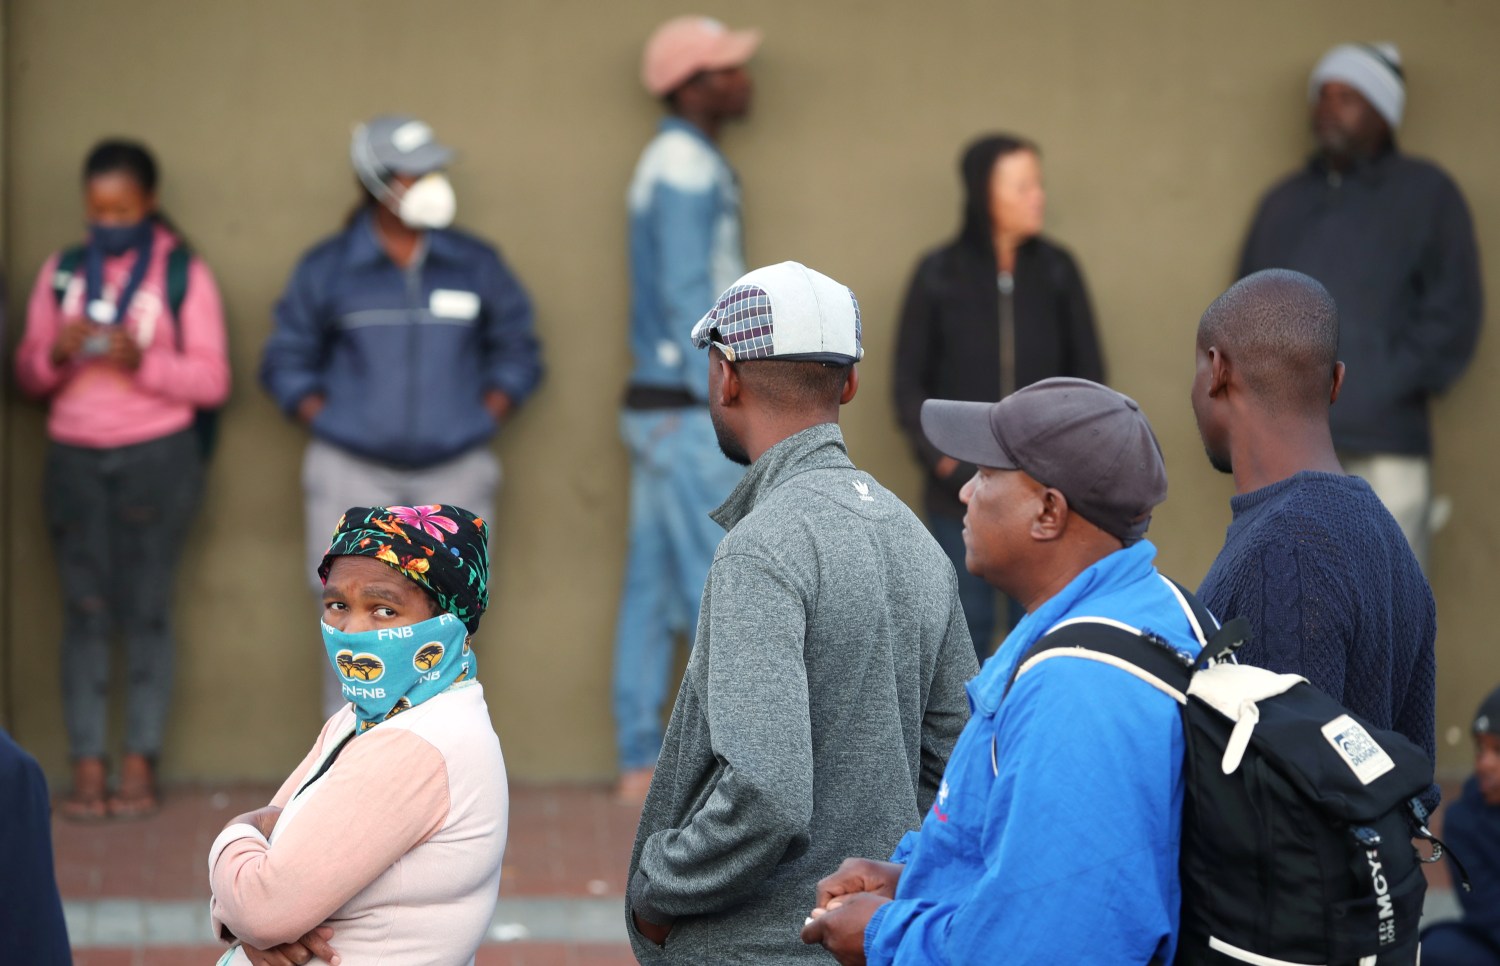 People queue to collect social grants and shop during a 21 day nationwide lockdown aimed at limiting the spread of coronavirus disease (COVID-19) in Khayelitsha township near Cape Town, South Africa, March 31, 2020. Reuters/Mike Hutchings